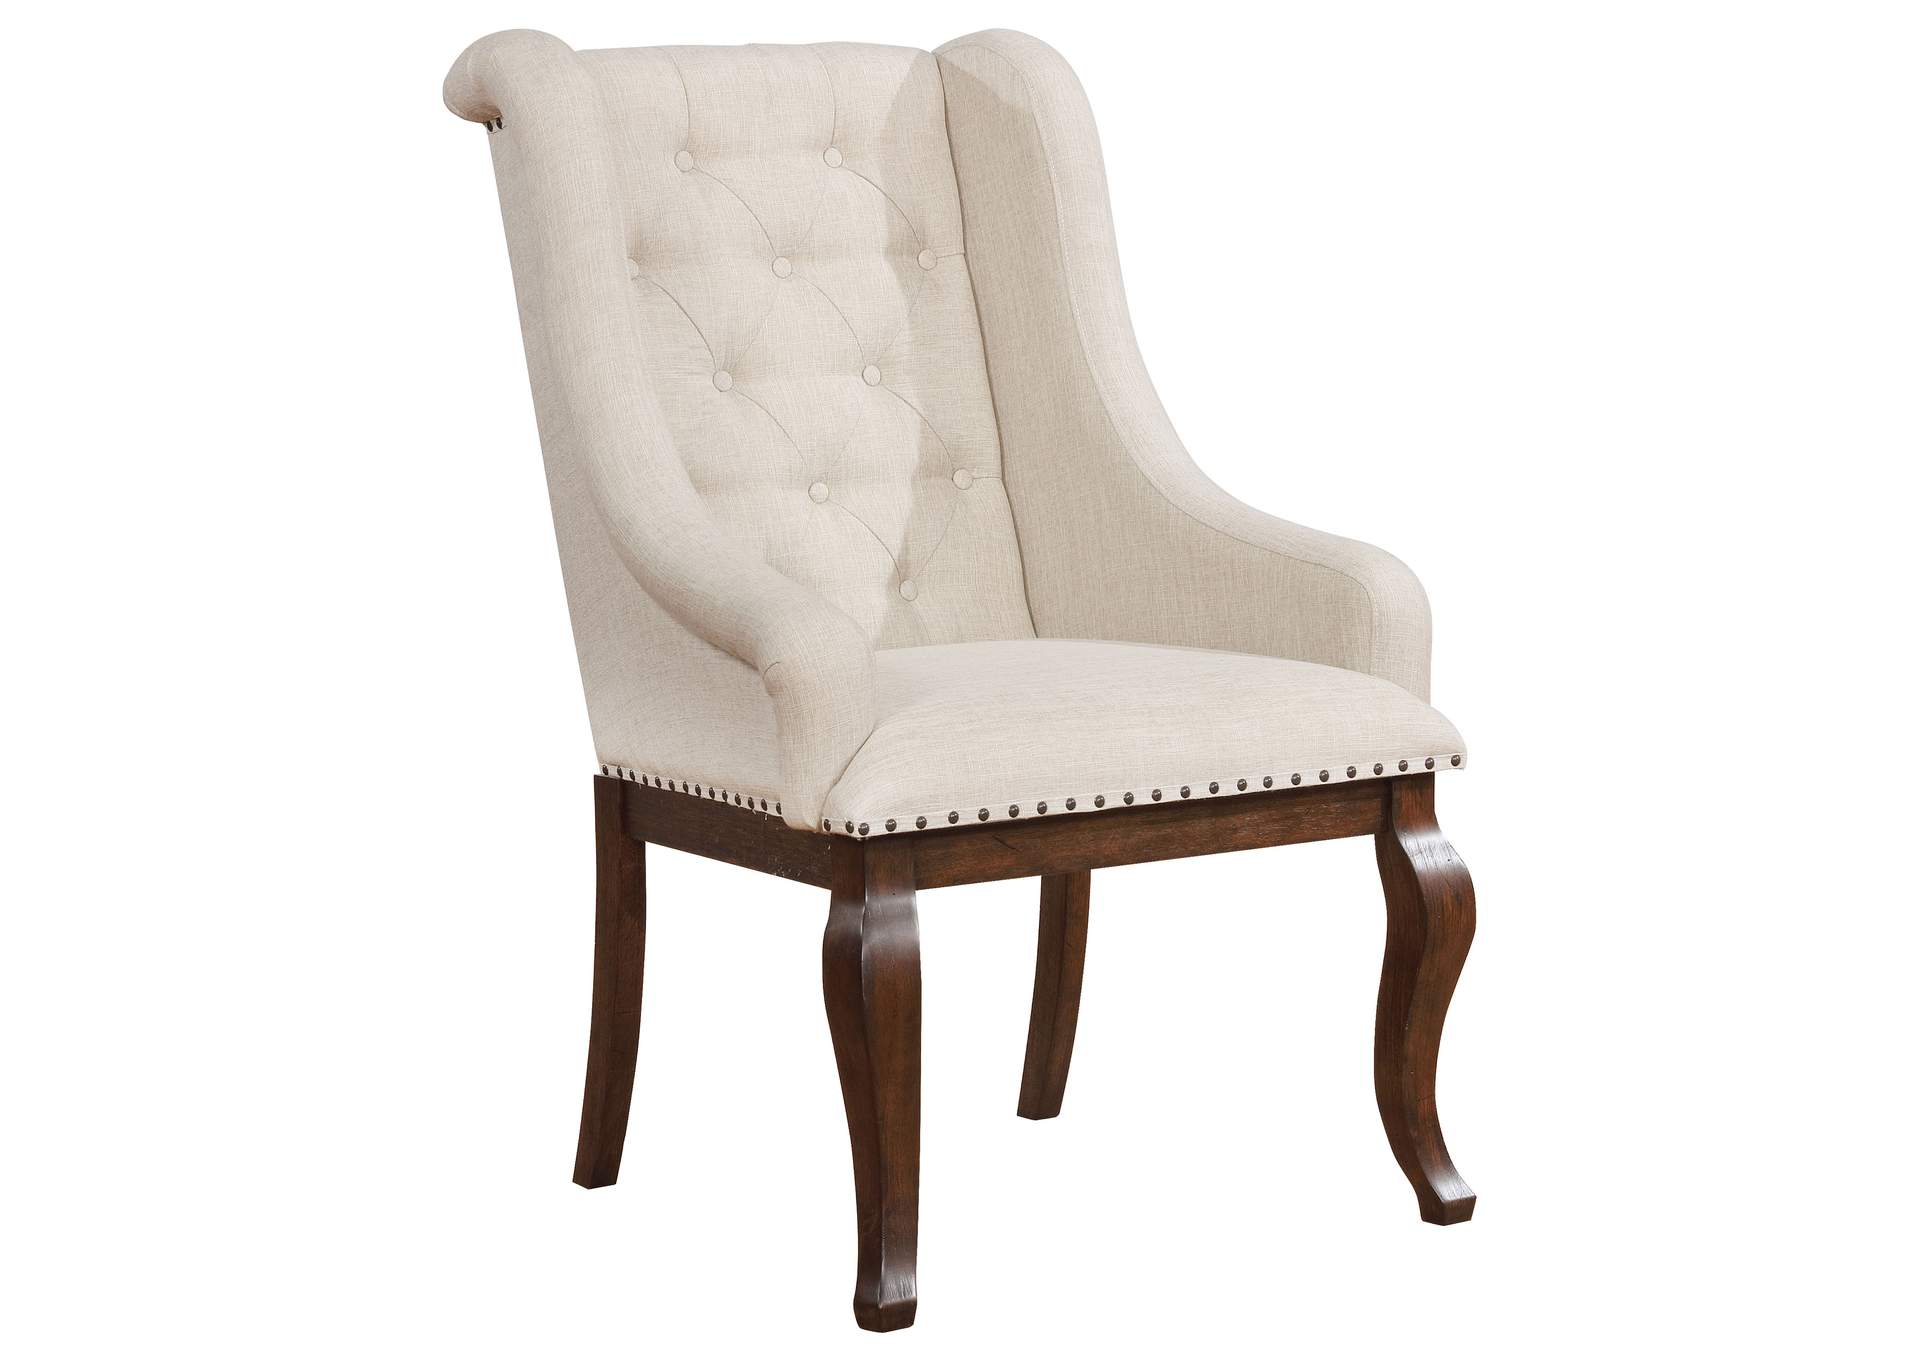 Brockway Cove Tufted Arm Chairs Cream and Antique Java (Set of 2),Coaster Furniture